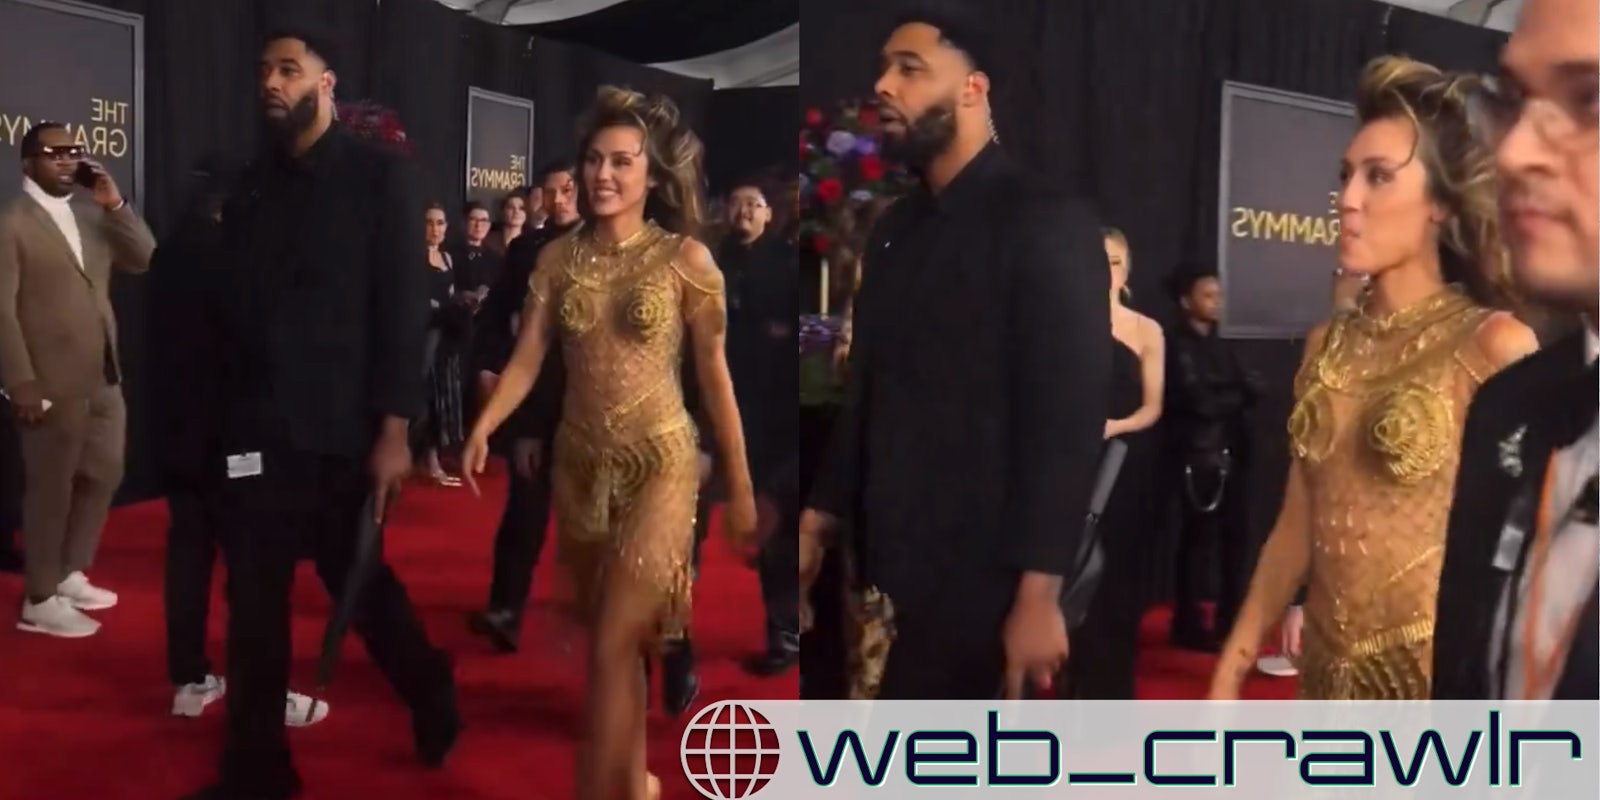 Screenshots of Miley Cyrus at the Grammy Awards next to a bodyguard holding an umbrella. The Daily Dot newsletter web_crawlr logo is in the bottom right corner.